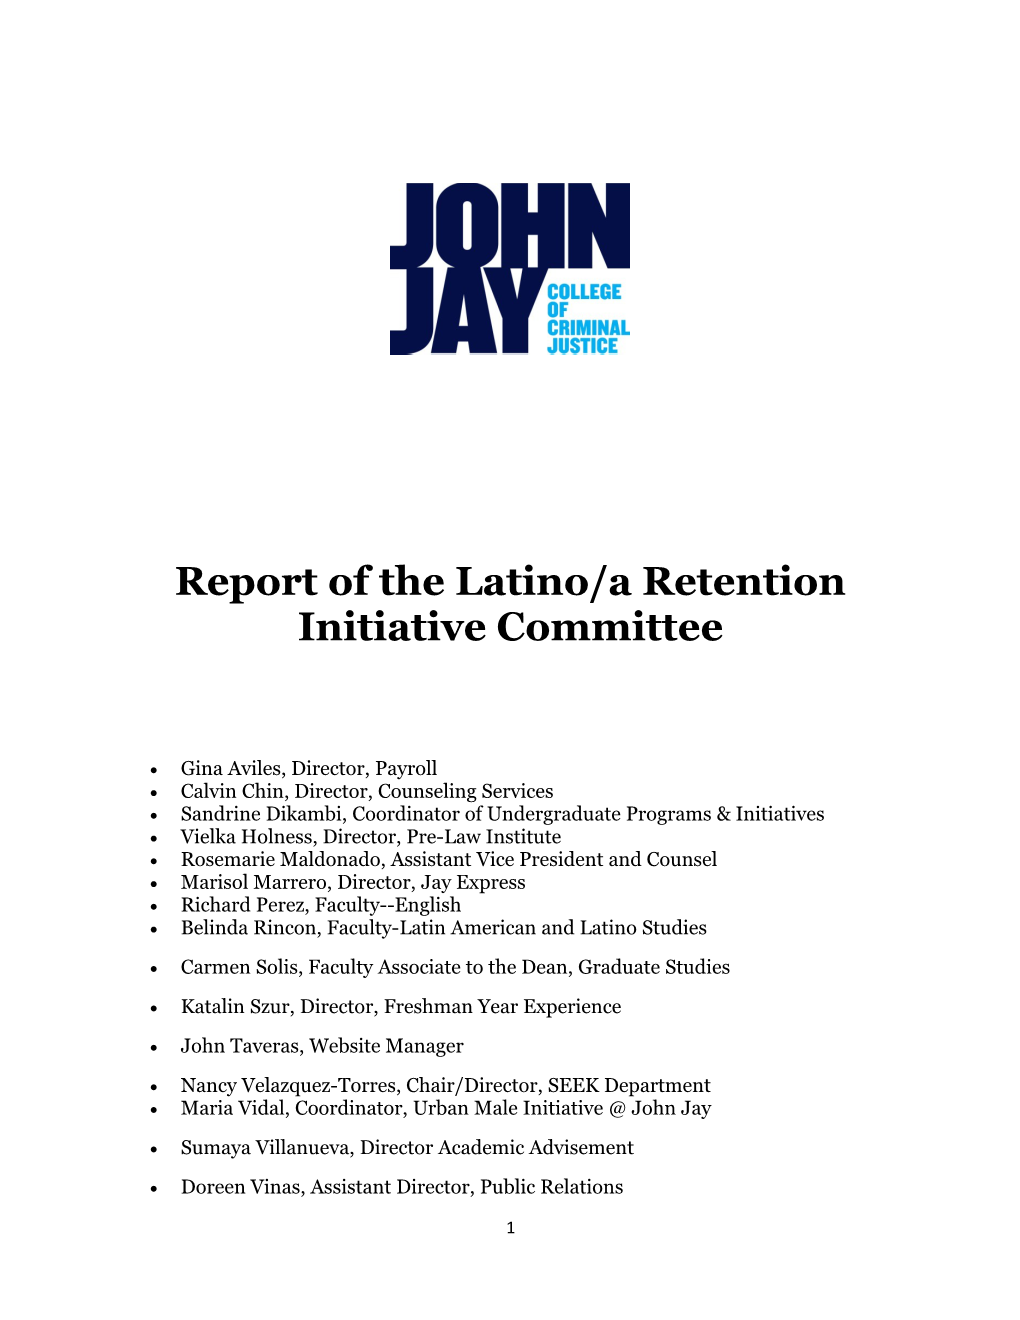 Report of the Latino/A Retention Initiative Committee